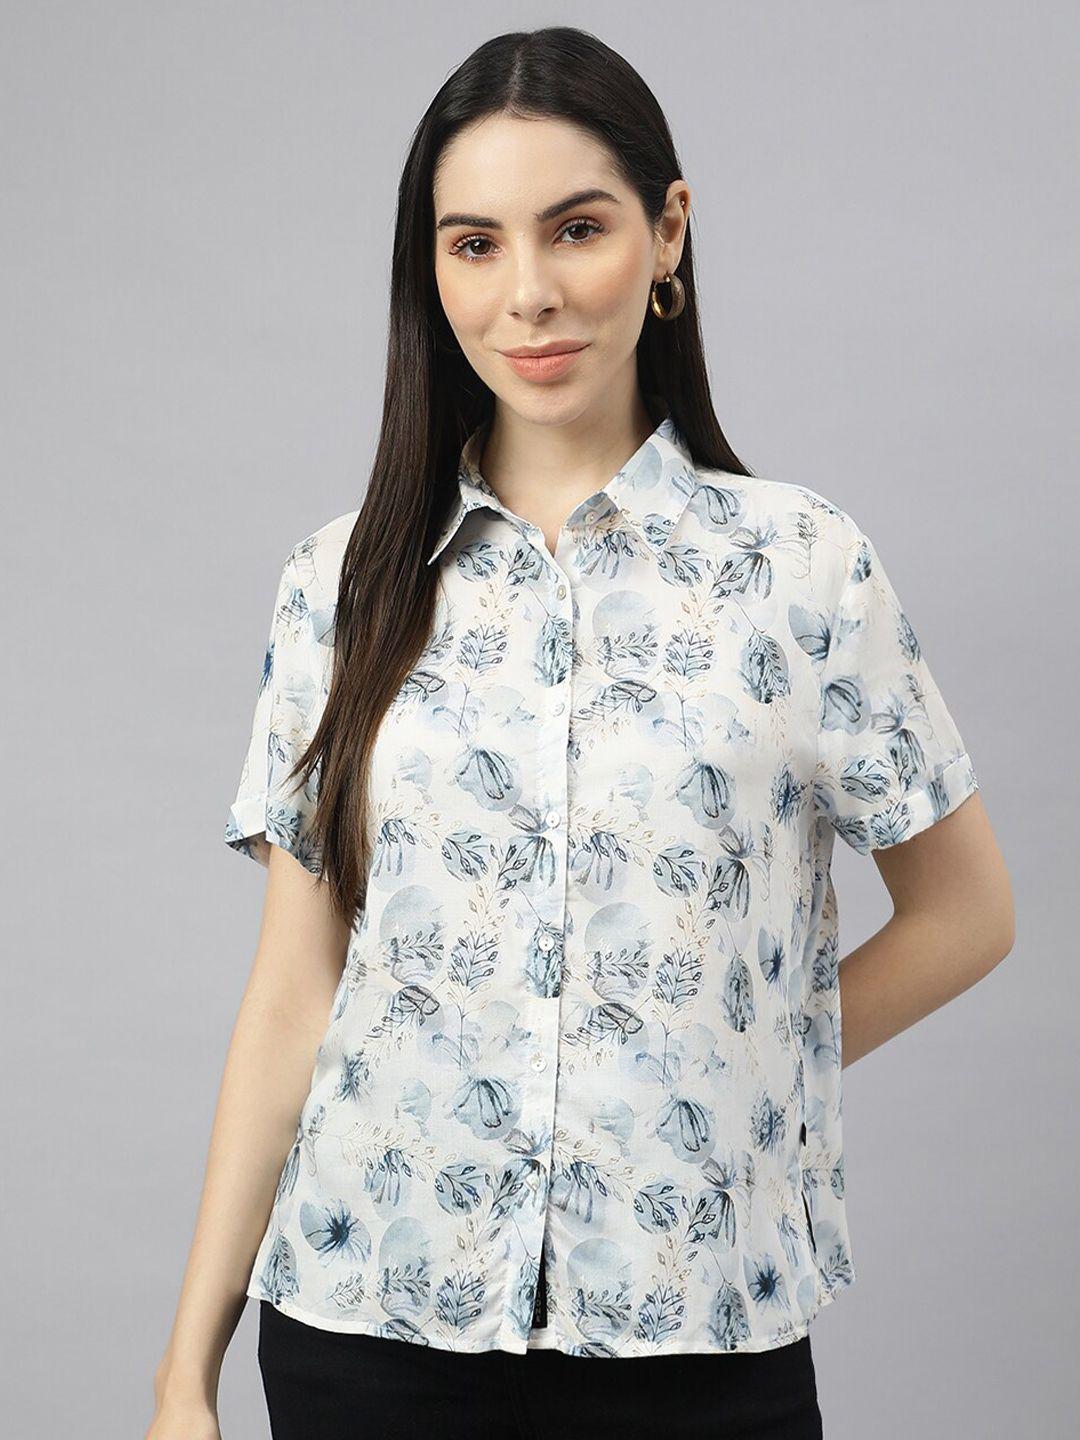 valbone classic spread collar floral printed casual shirt